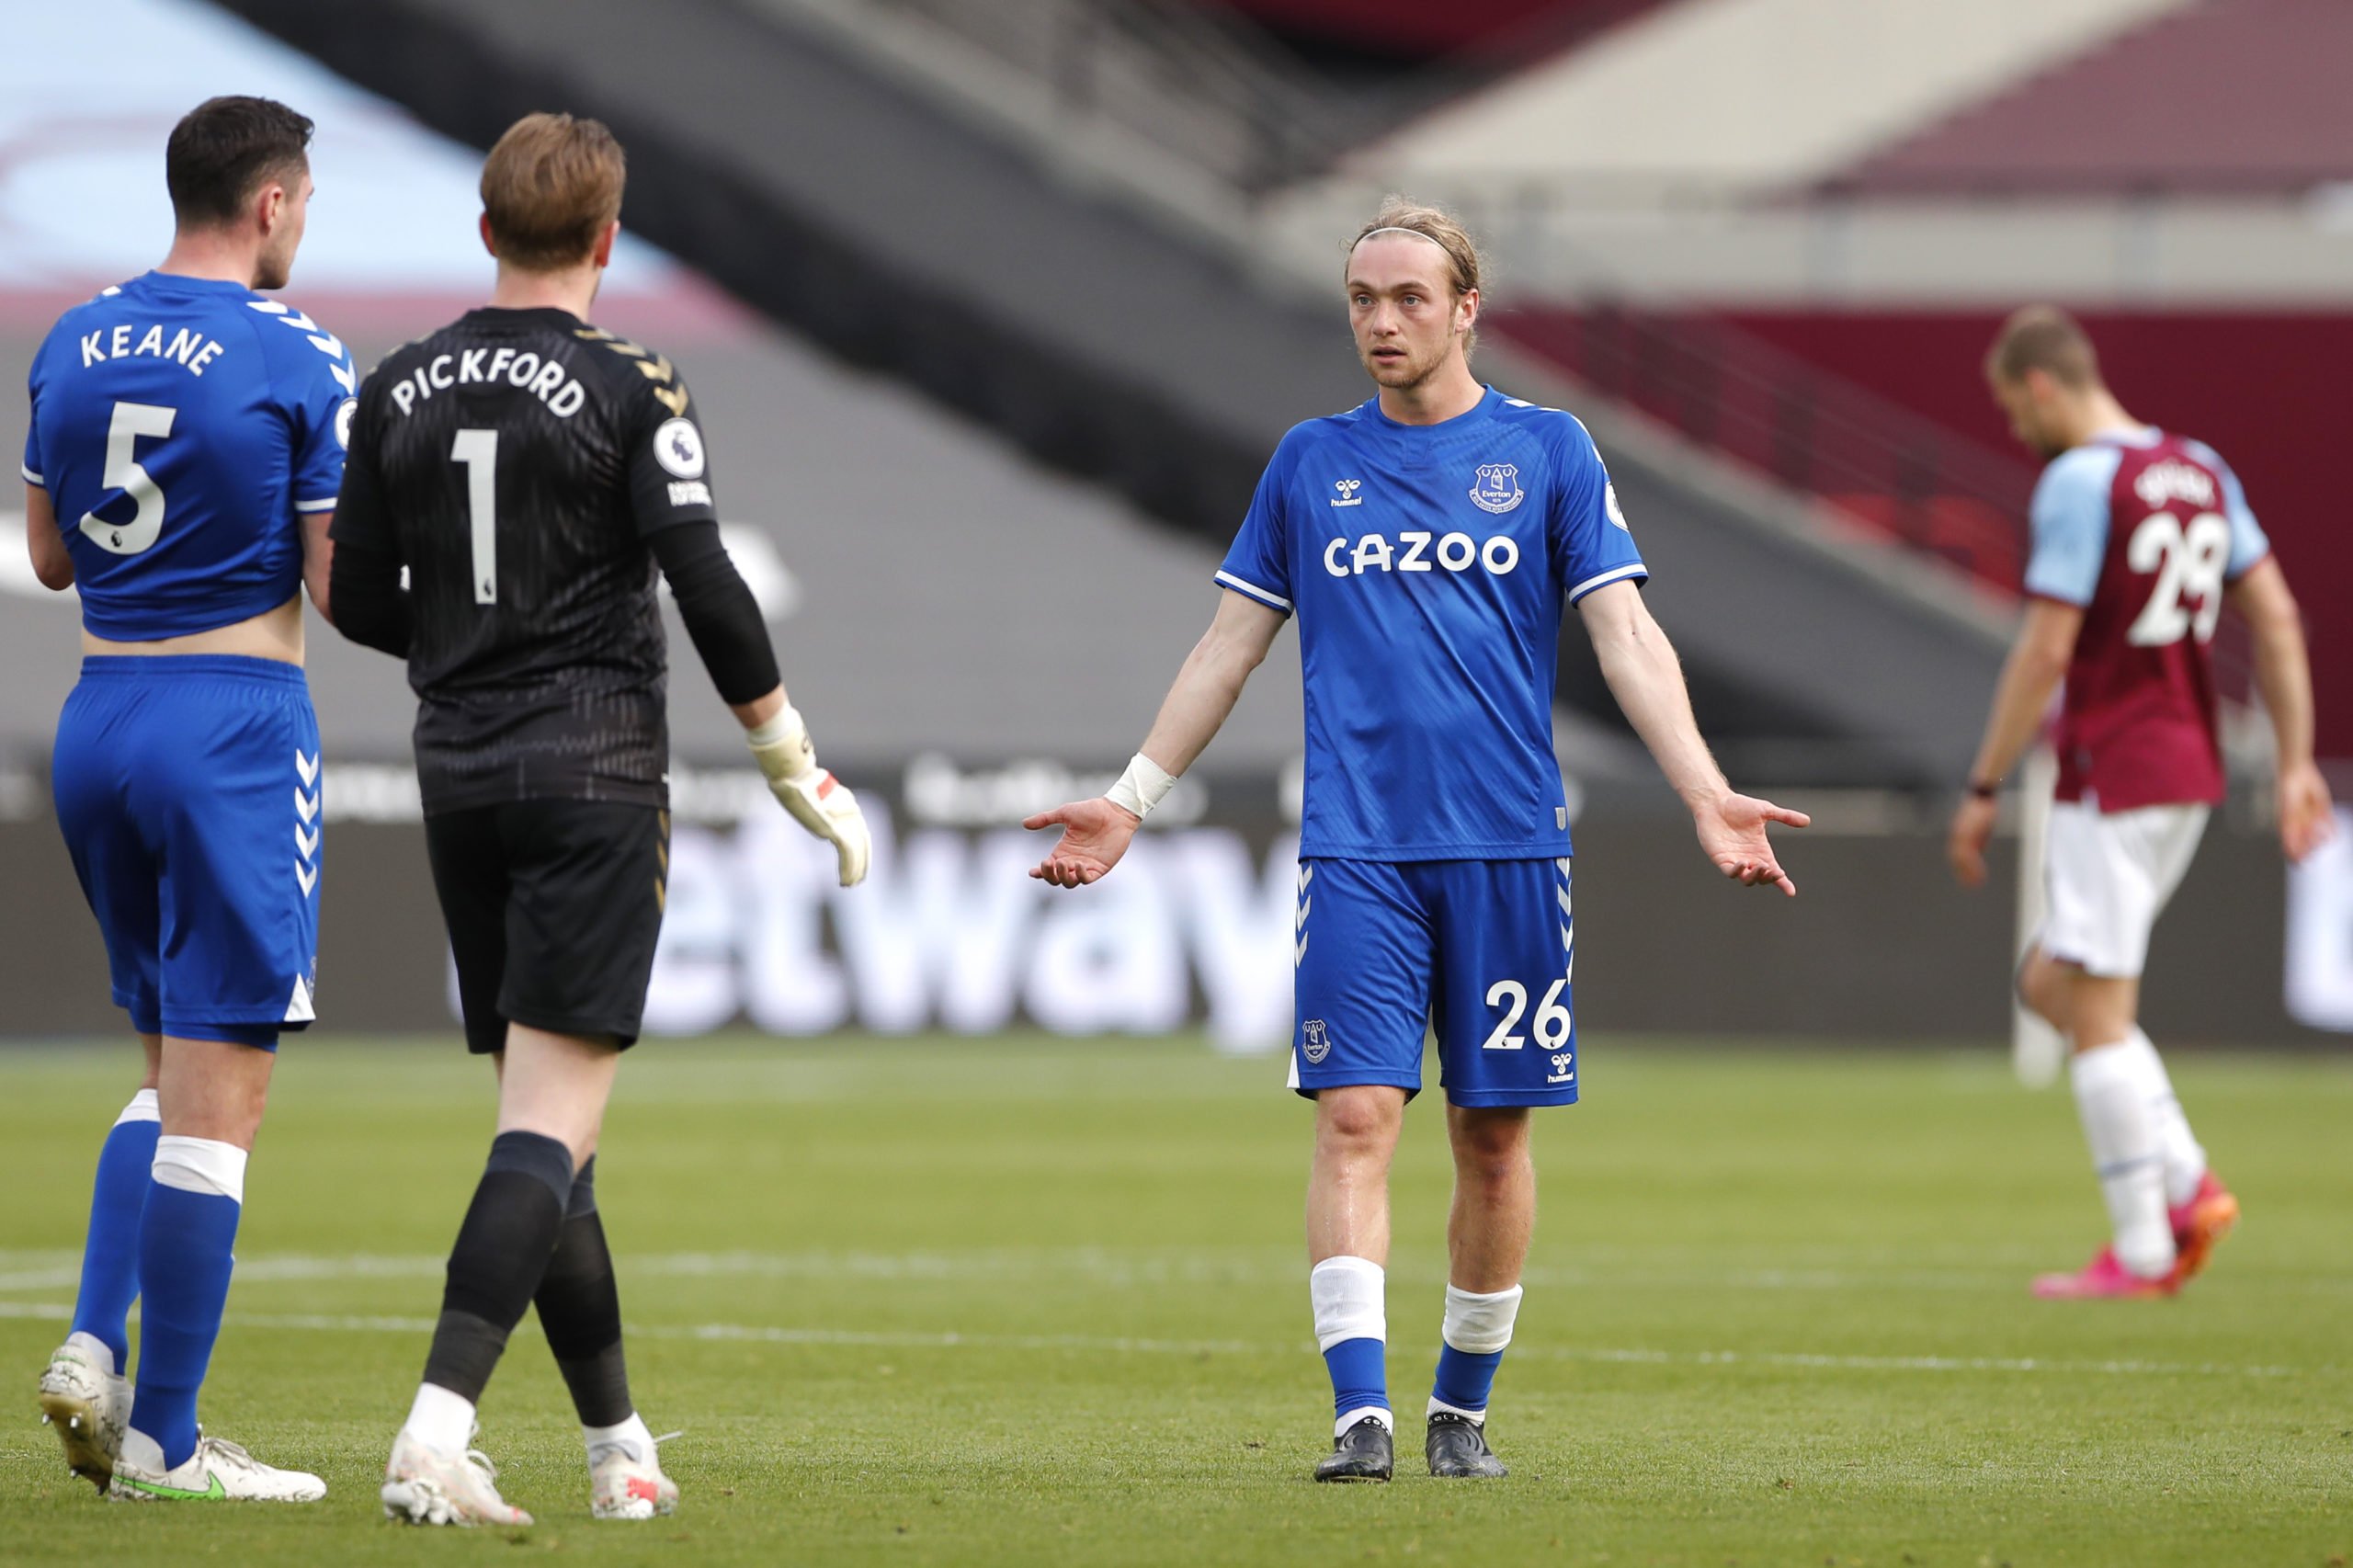 Phillips urges Everton's Tom Davies to leave in January (Davies is seen in the photo)